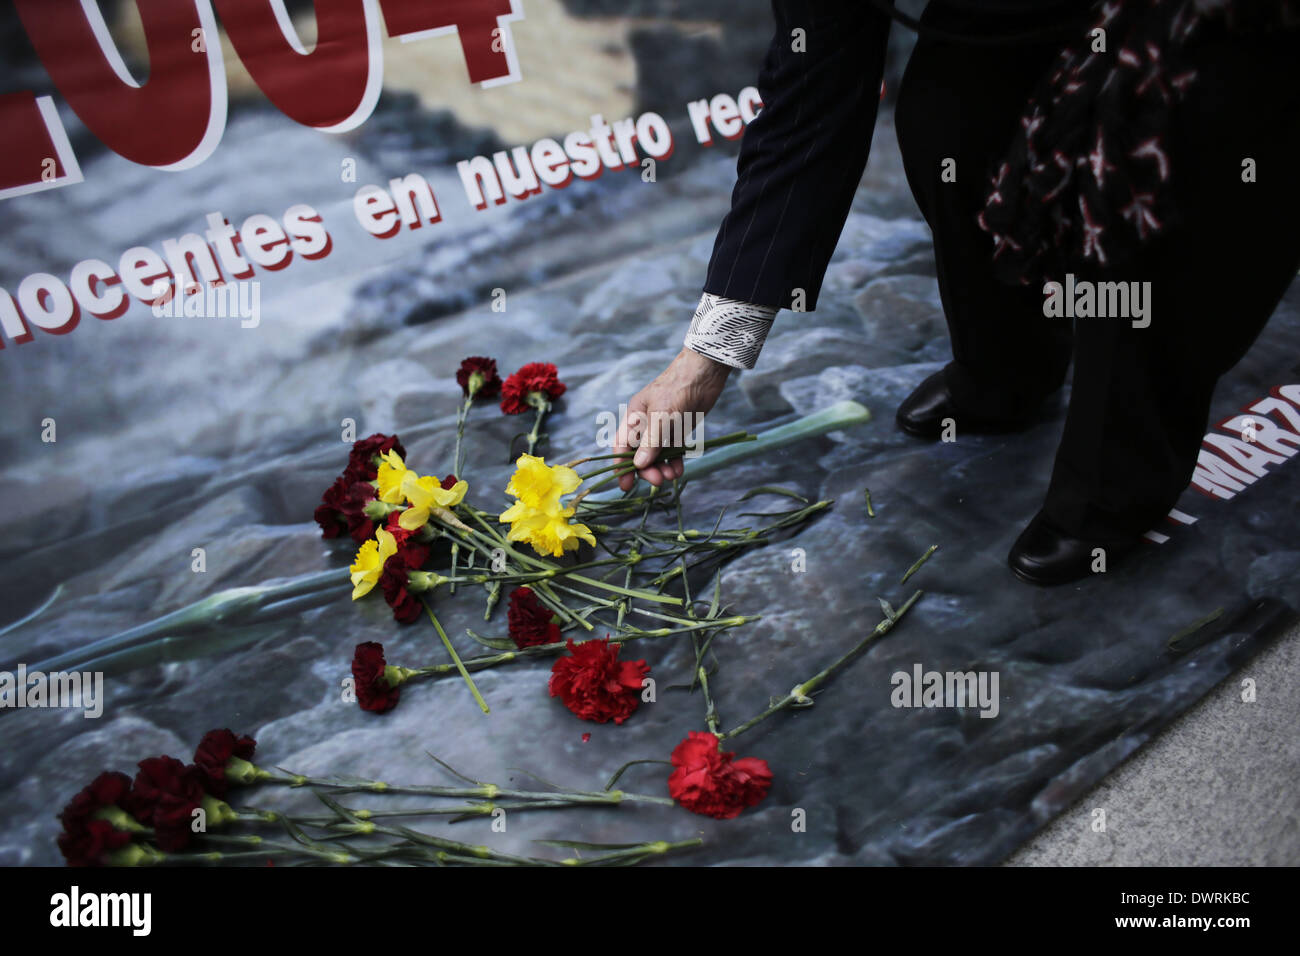 Madrid, Spain. 11th Mar, 2014. A woman drops flowers during an event outside Atocha's train station in remember of the people killed in the Madrid train bombings in Madrid, Spain, Tuesday March 11, 2014, in remembrance of those killed and injured in the Madrid train bombings, marking the 10th anniversary of Europe's worst Islamic terror attack. The attackers targeted four commuter trains with 10 shrapnel-filled bombs concealed in backpacks during morning rush hour on March 11, 2004. Credit:  Rodrigo Garcia/NurPhoto/ZUMAPRESS.com/Alamy Live News Stock Photo